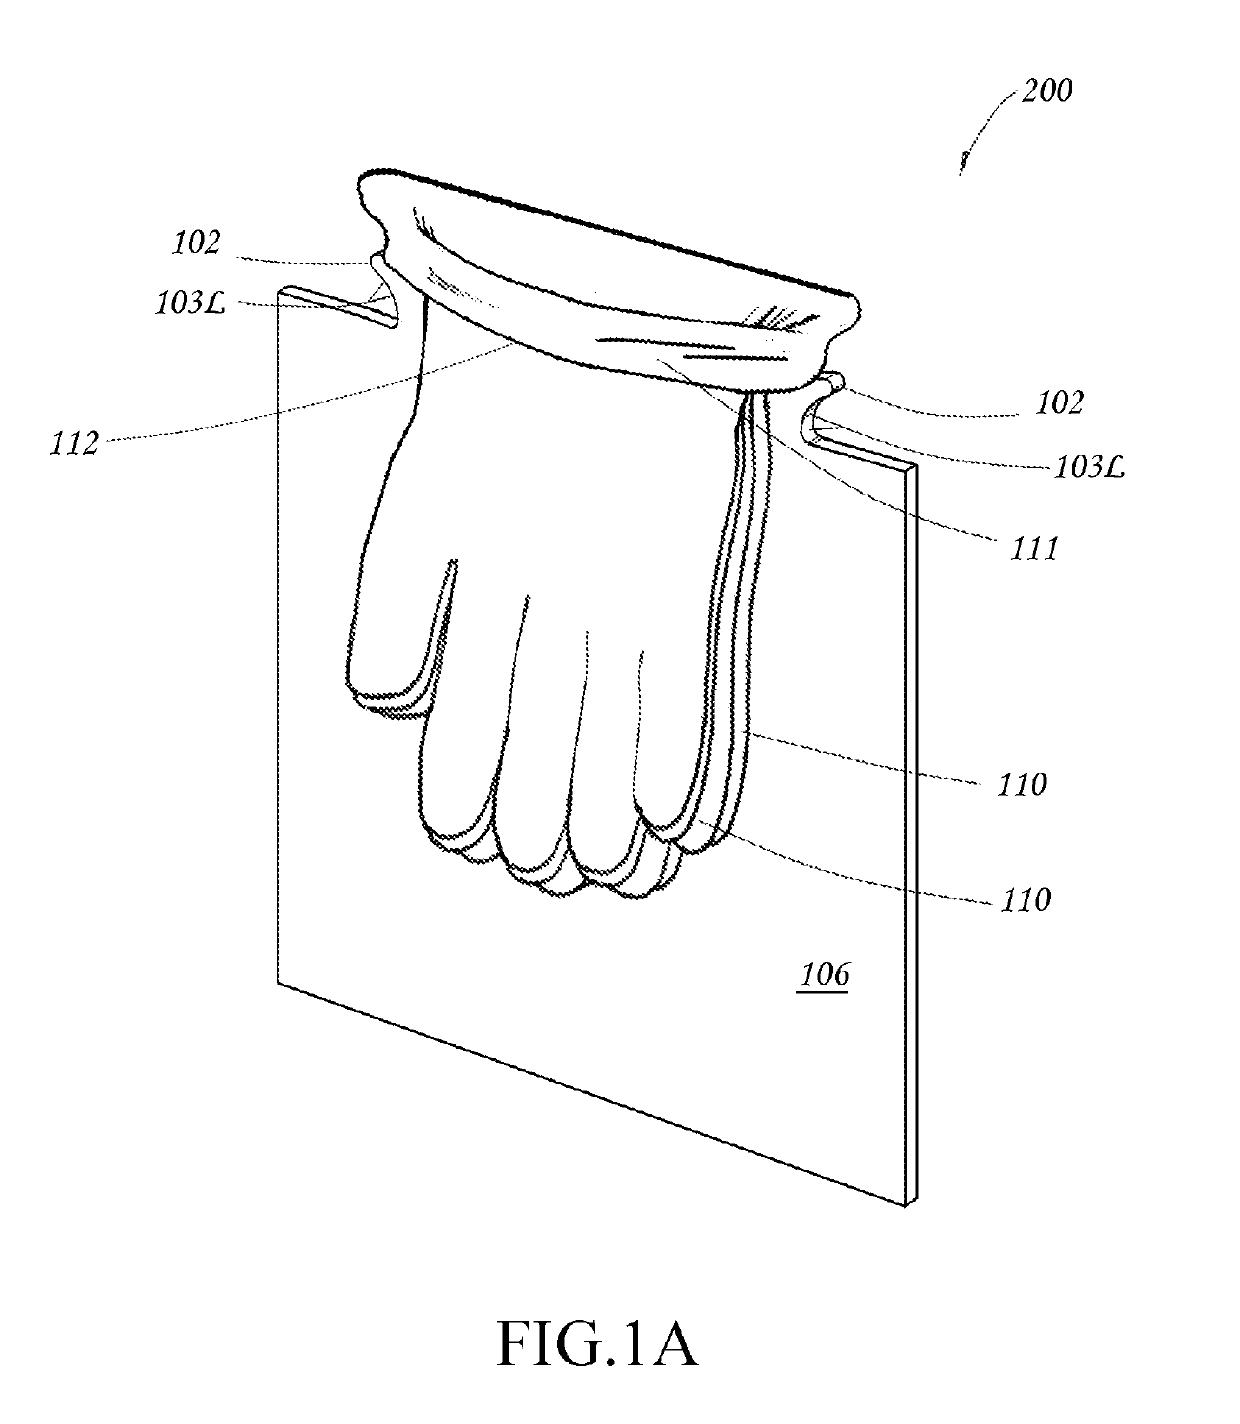 Method and Apparatus for Disposable Glove Dispensing